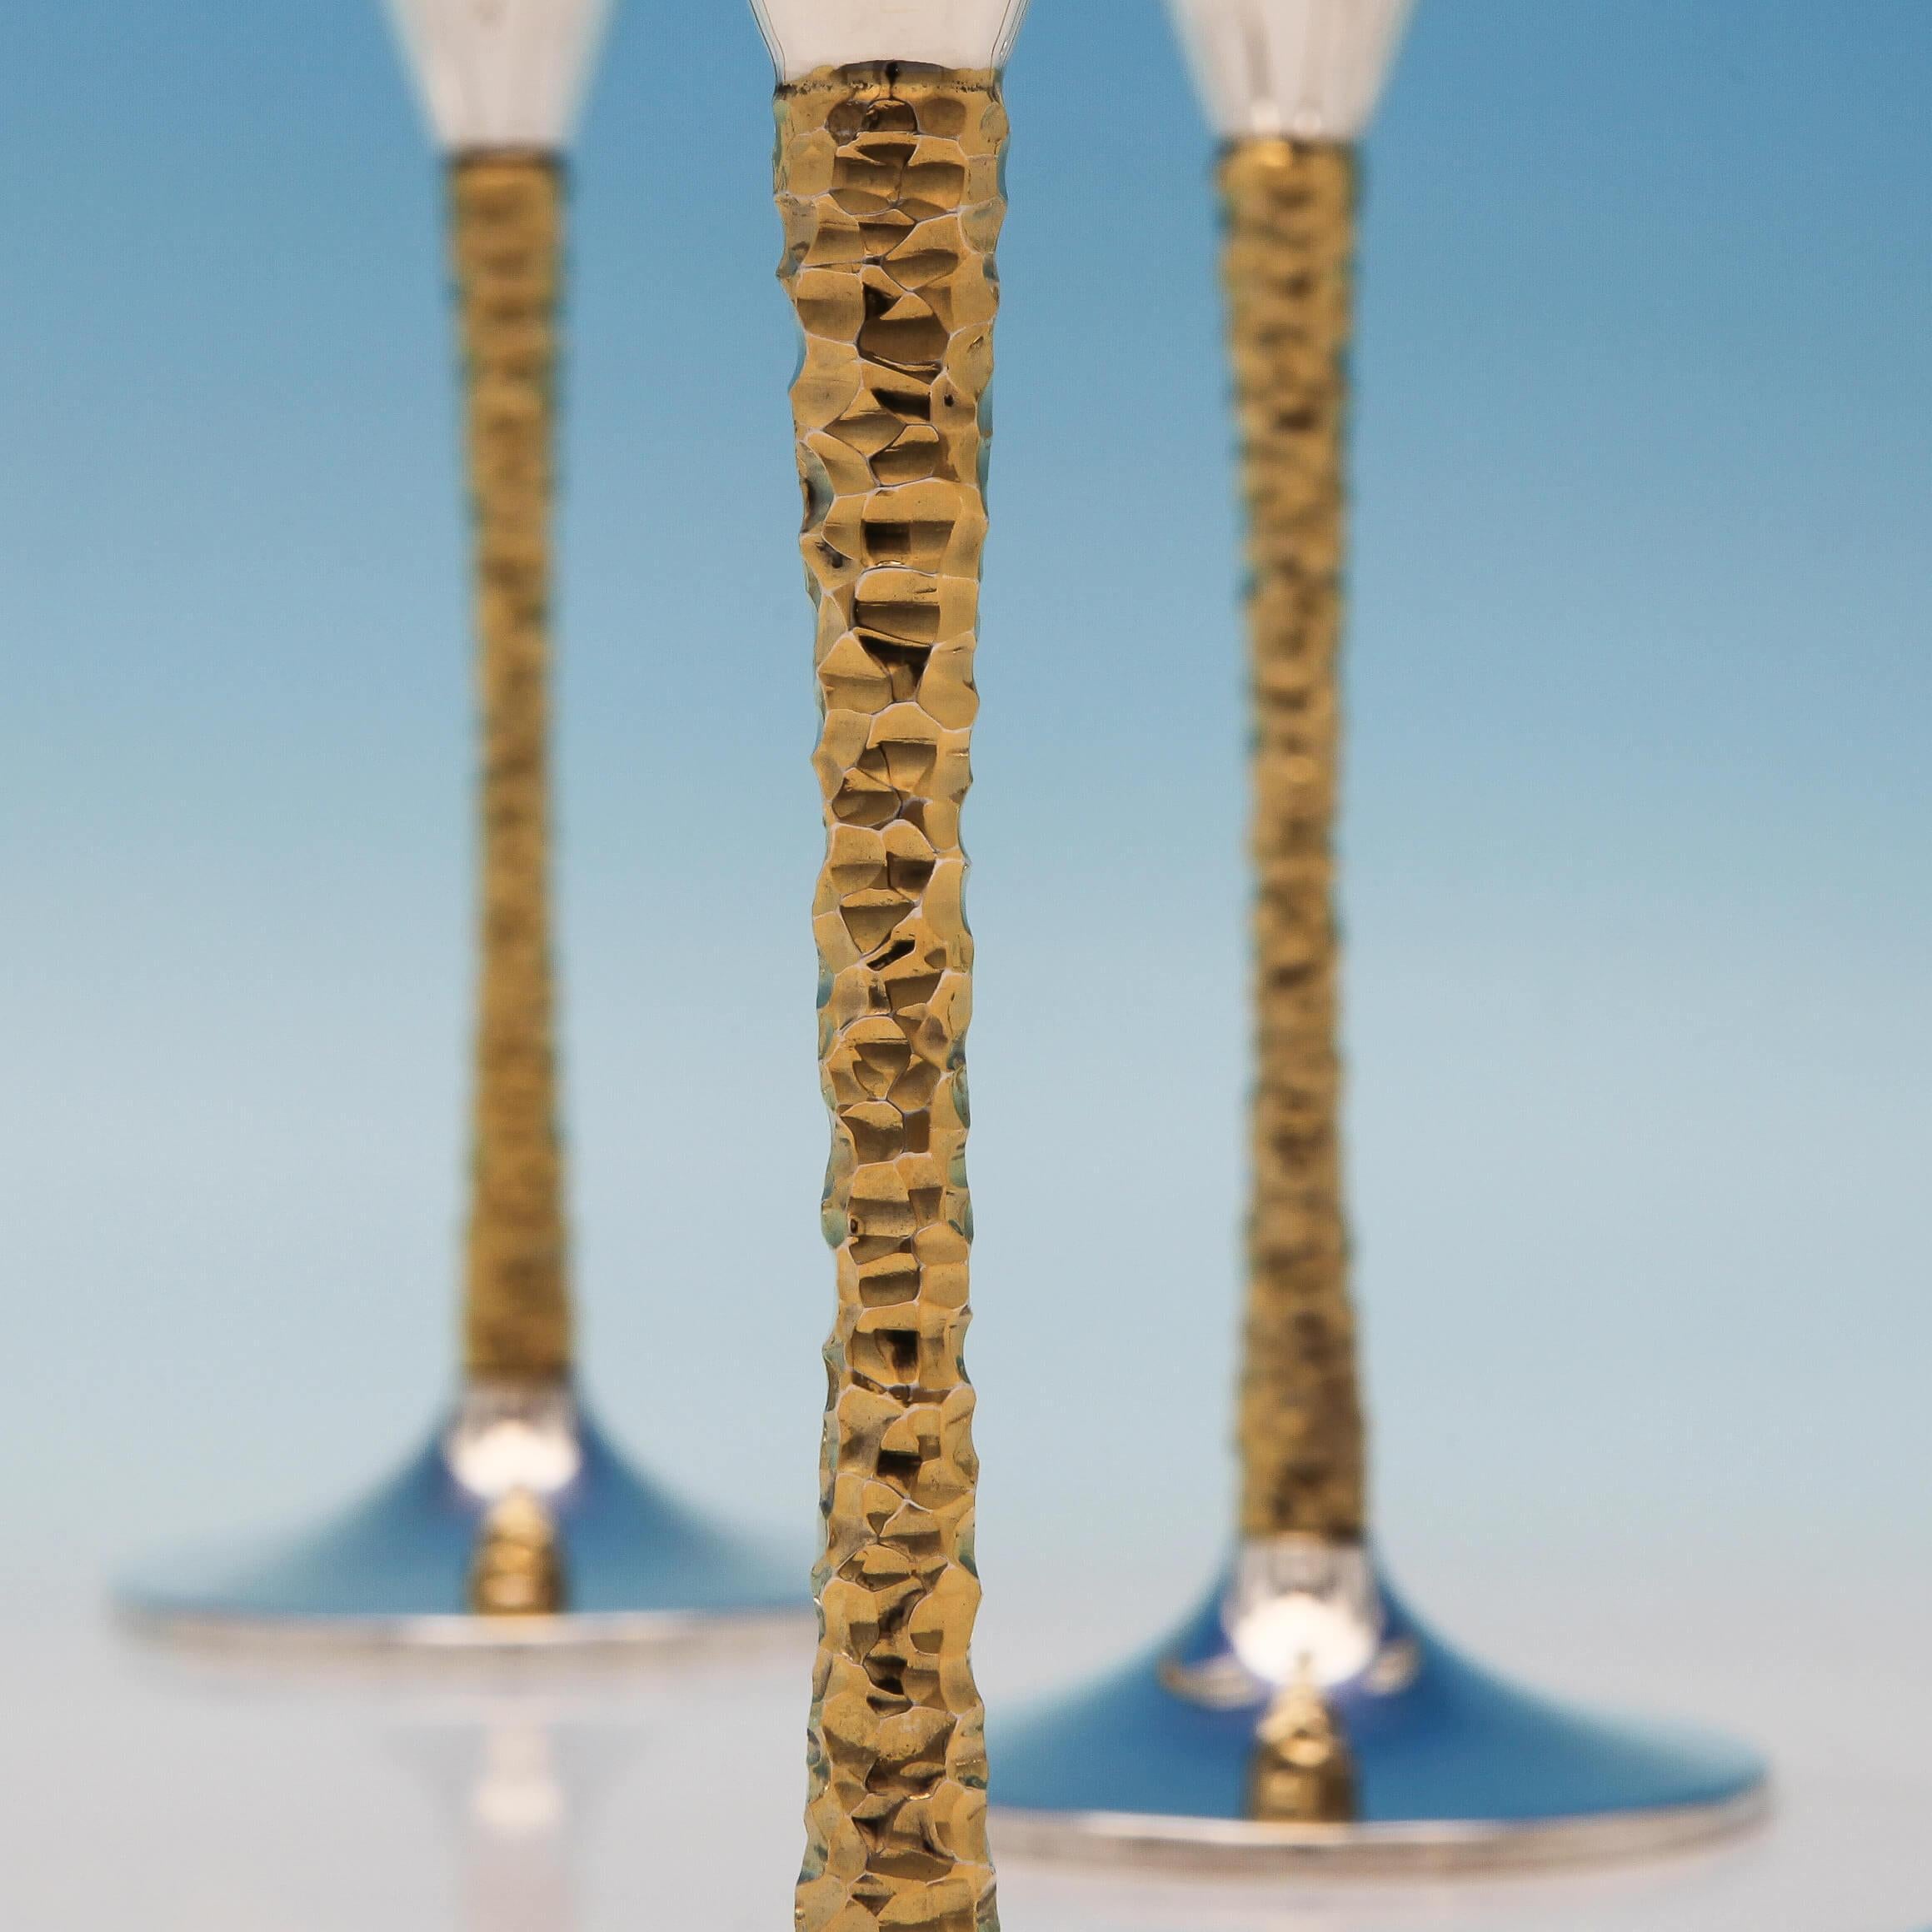 Hallmarked in London in 1977-1980 by Stuart Devlin, this extraordinary set of 12, Elizabeth II, parcel gilt sterling silver Champagne flutes are elegant in design, with gilt bark effect stems in the typical Devlin style. Each Champagne flute